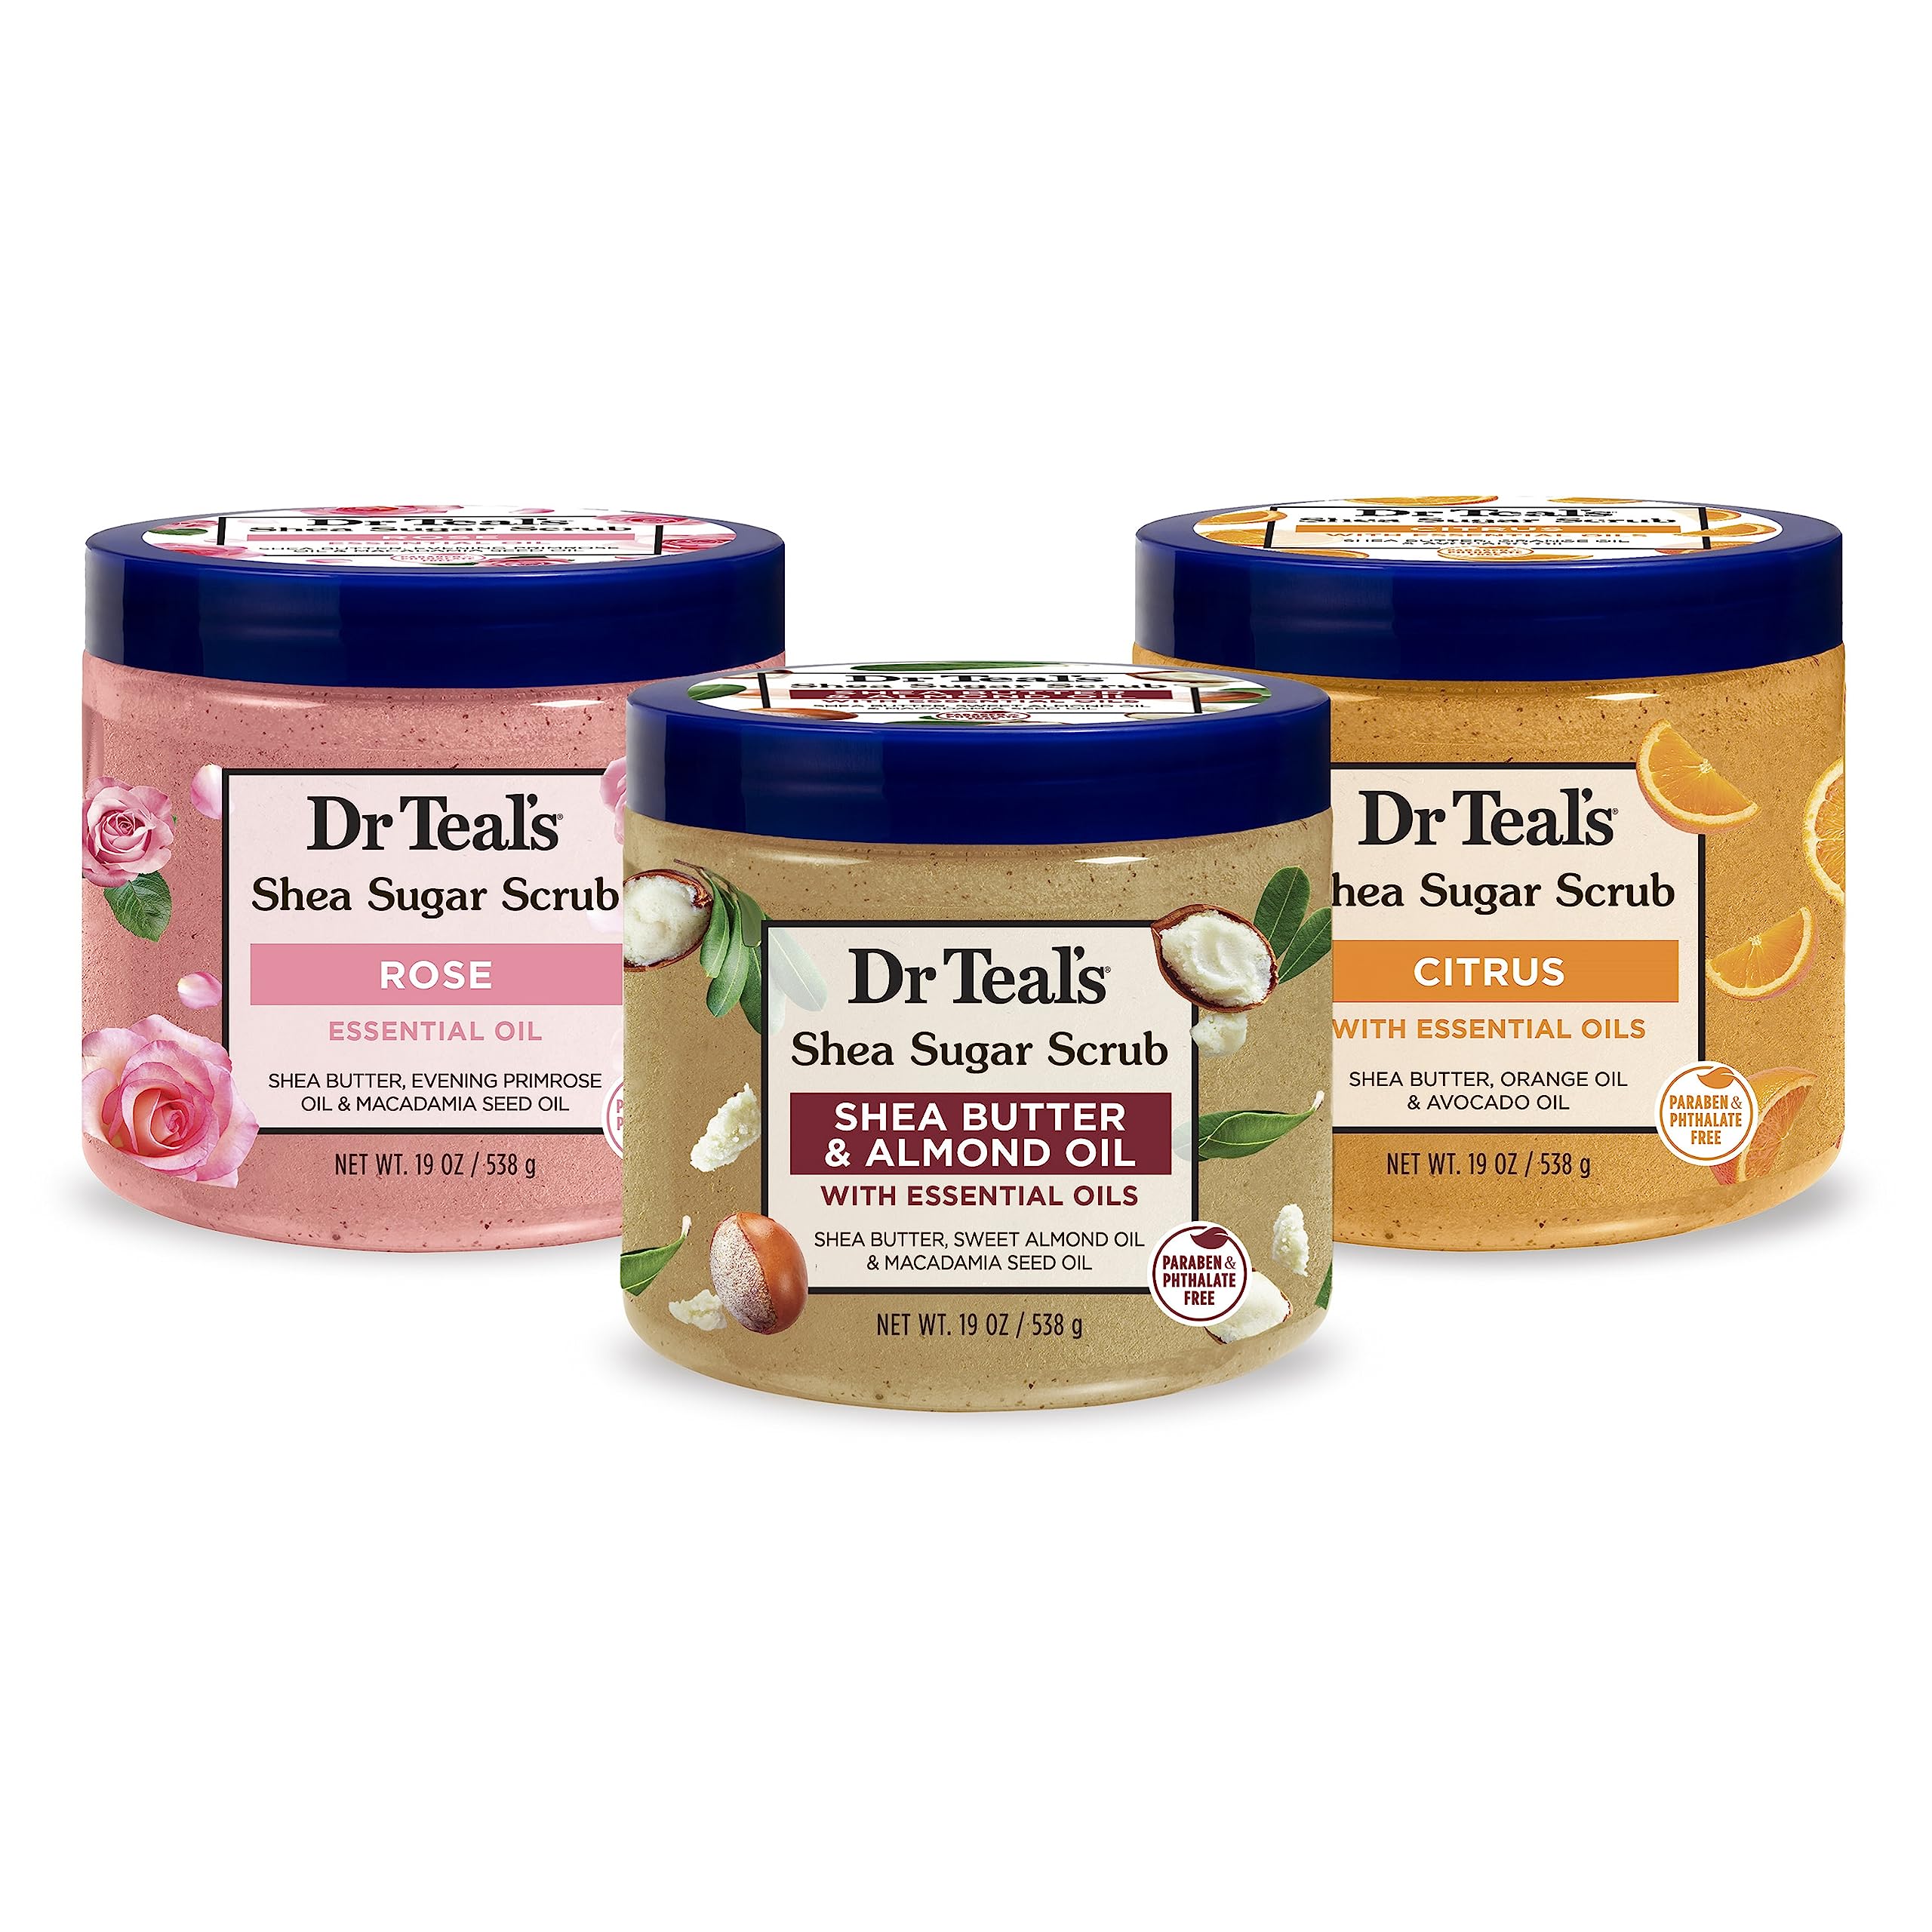 Dr Teal's Shea Sugar Scrub Trial Pack, Rose, Shea Butter, Citrus 19 oz (Pack of 3) (Packaging May Vary)